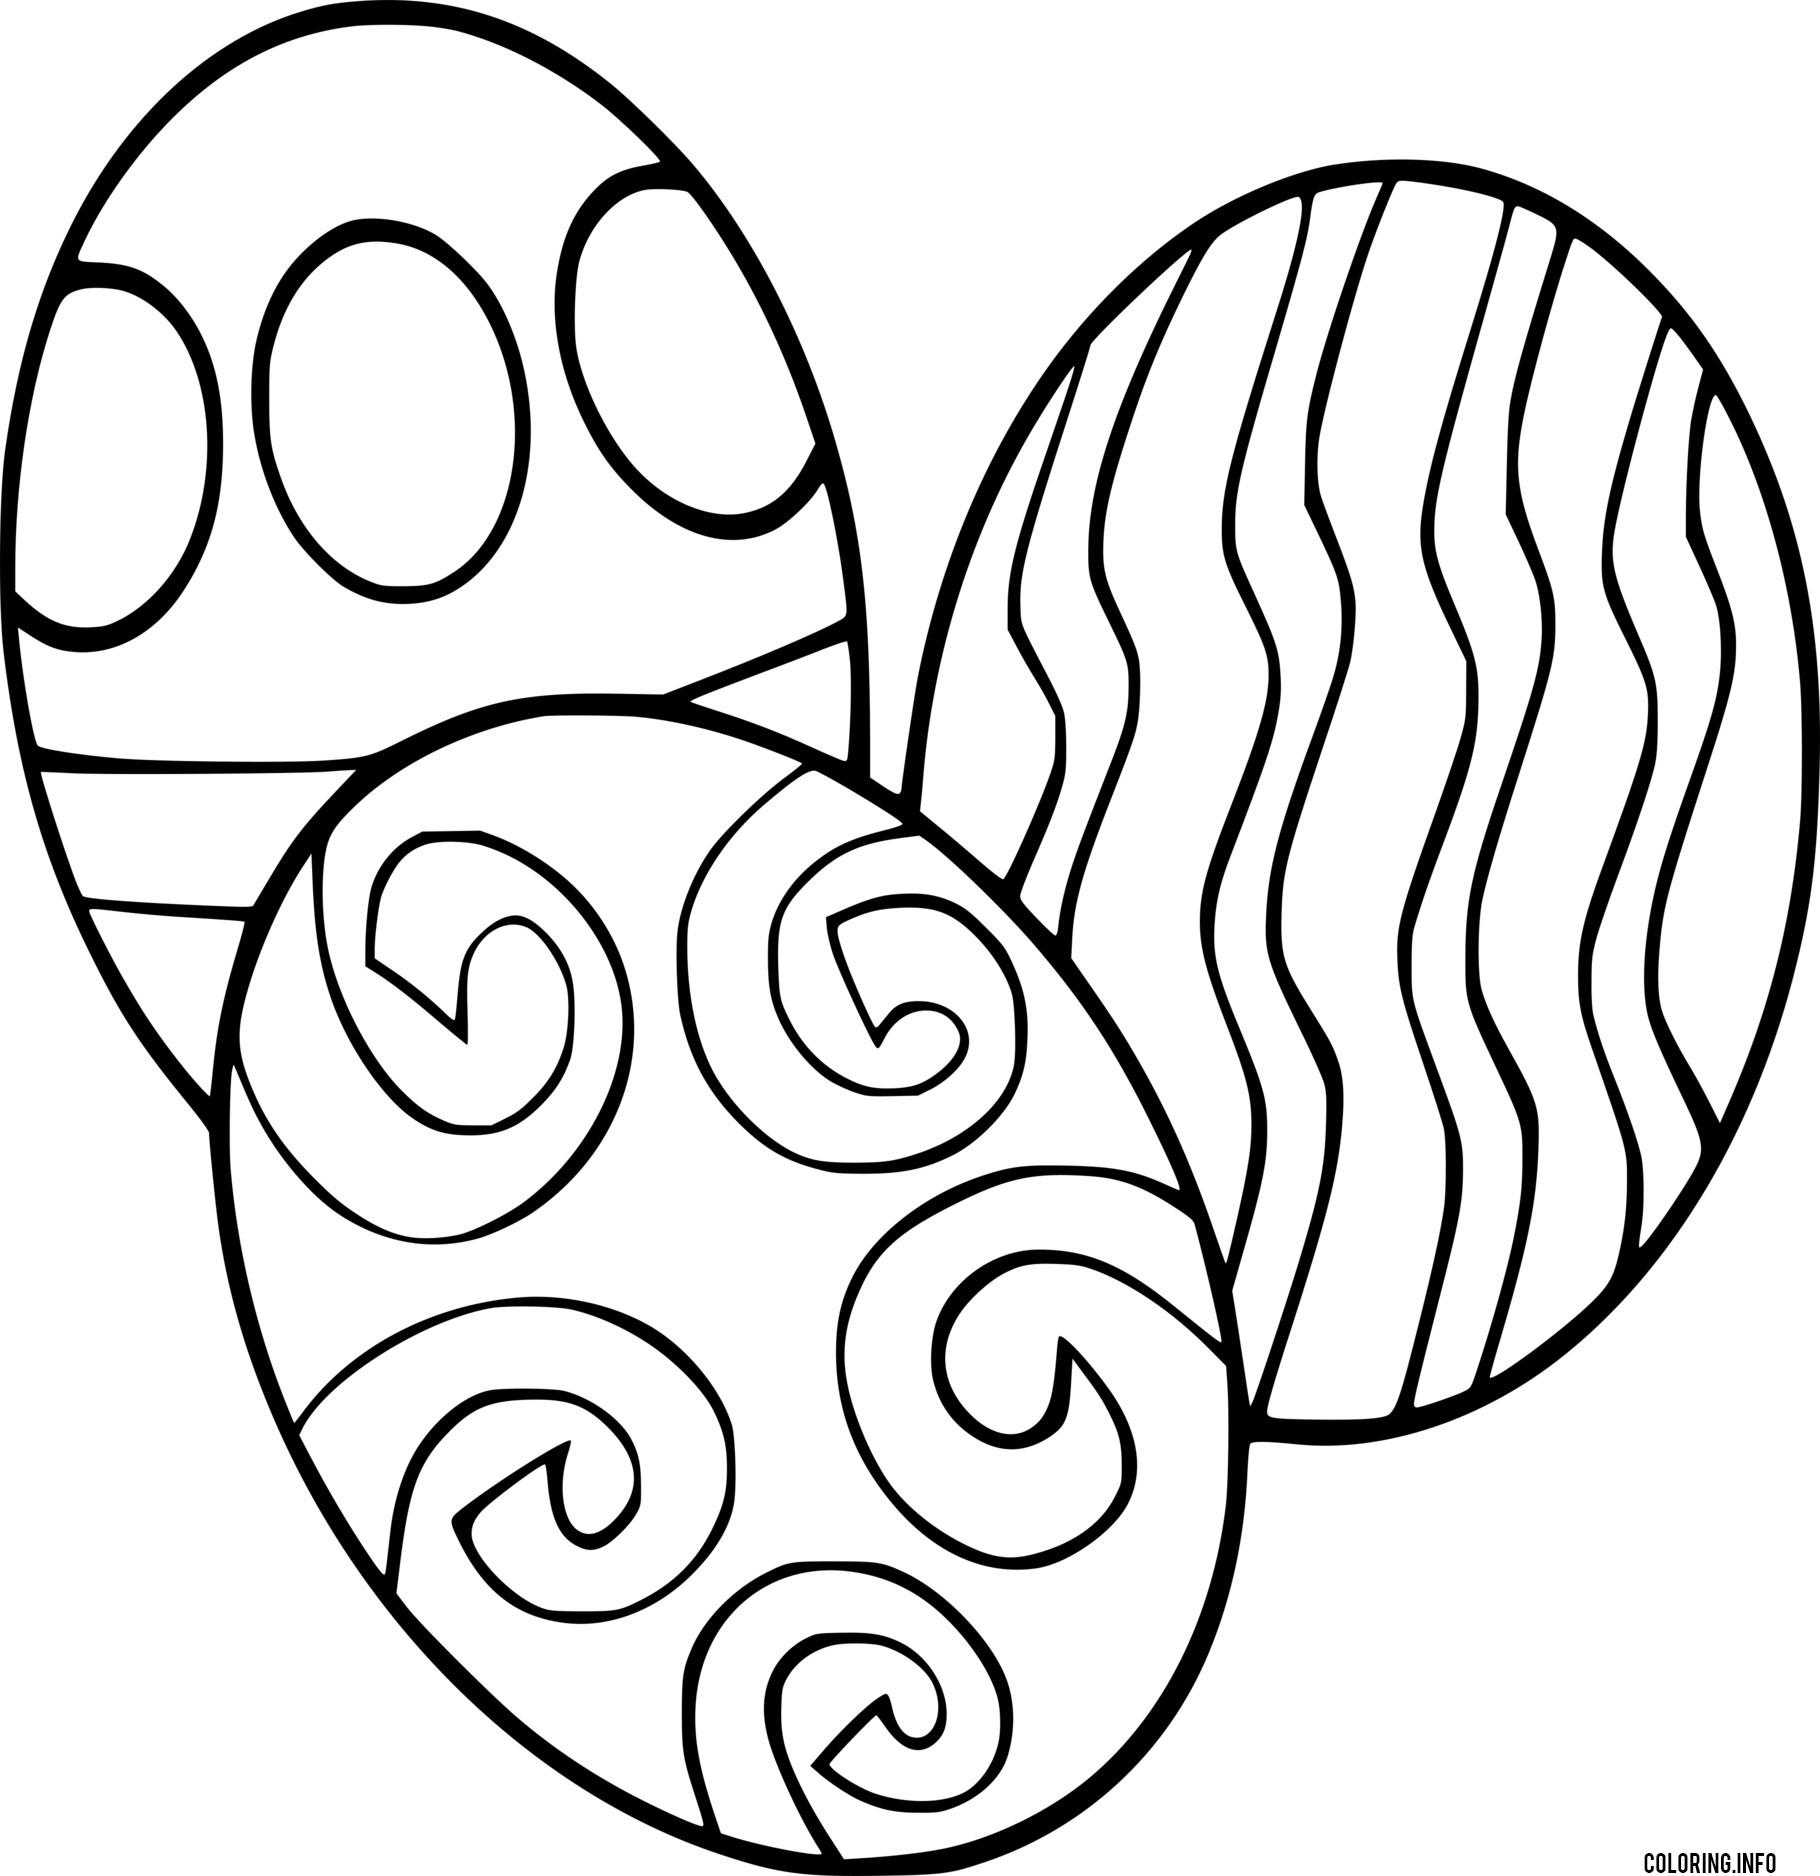 Three Easter Eggs With Circle And Wave Lines coloring